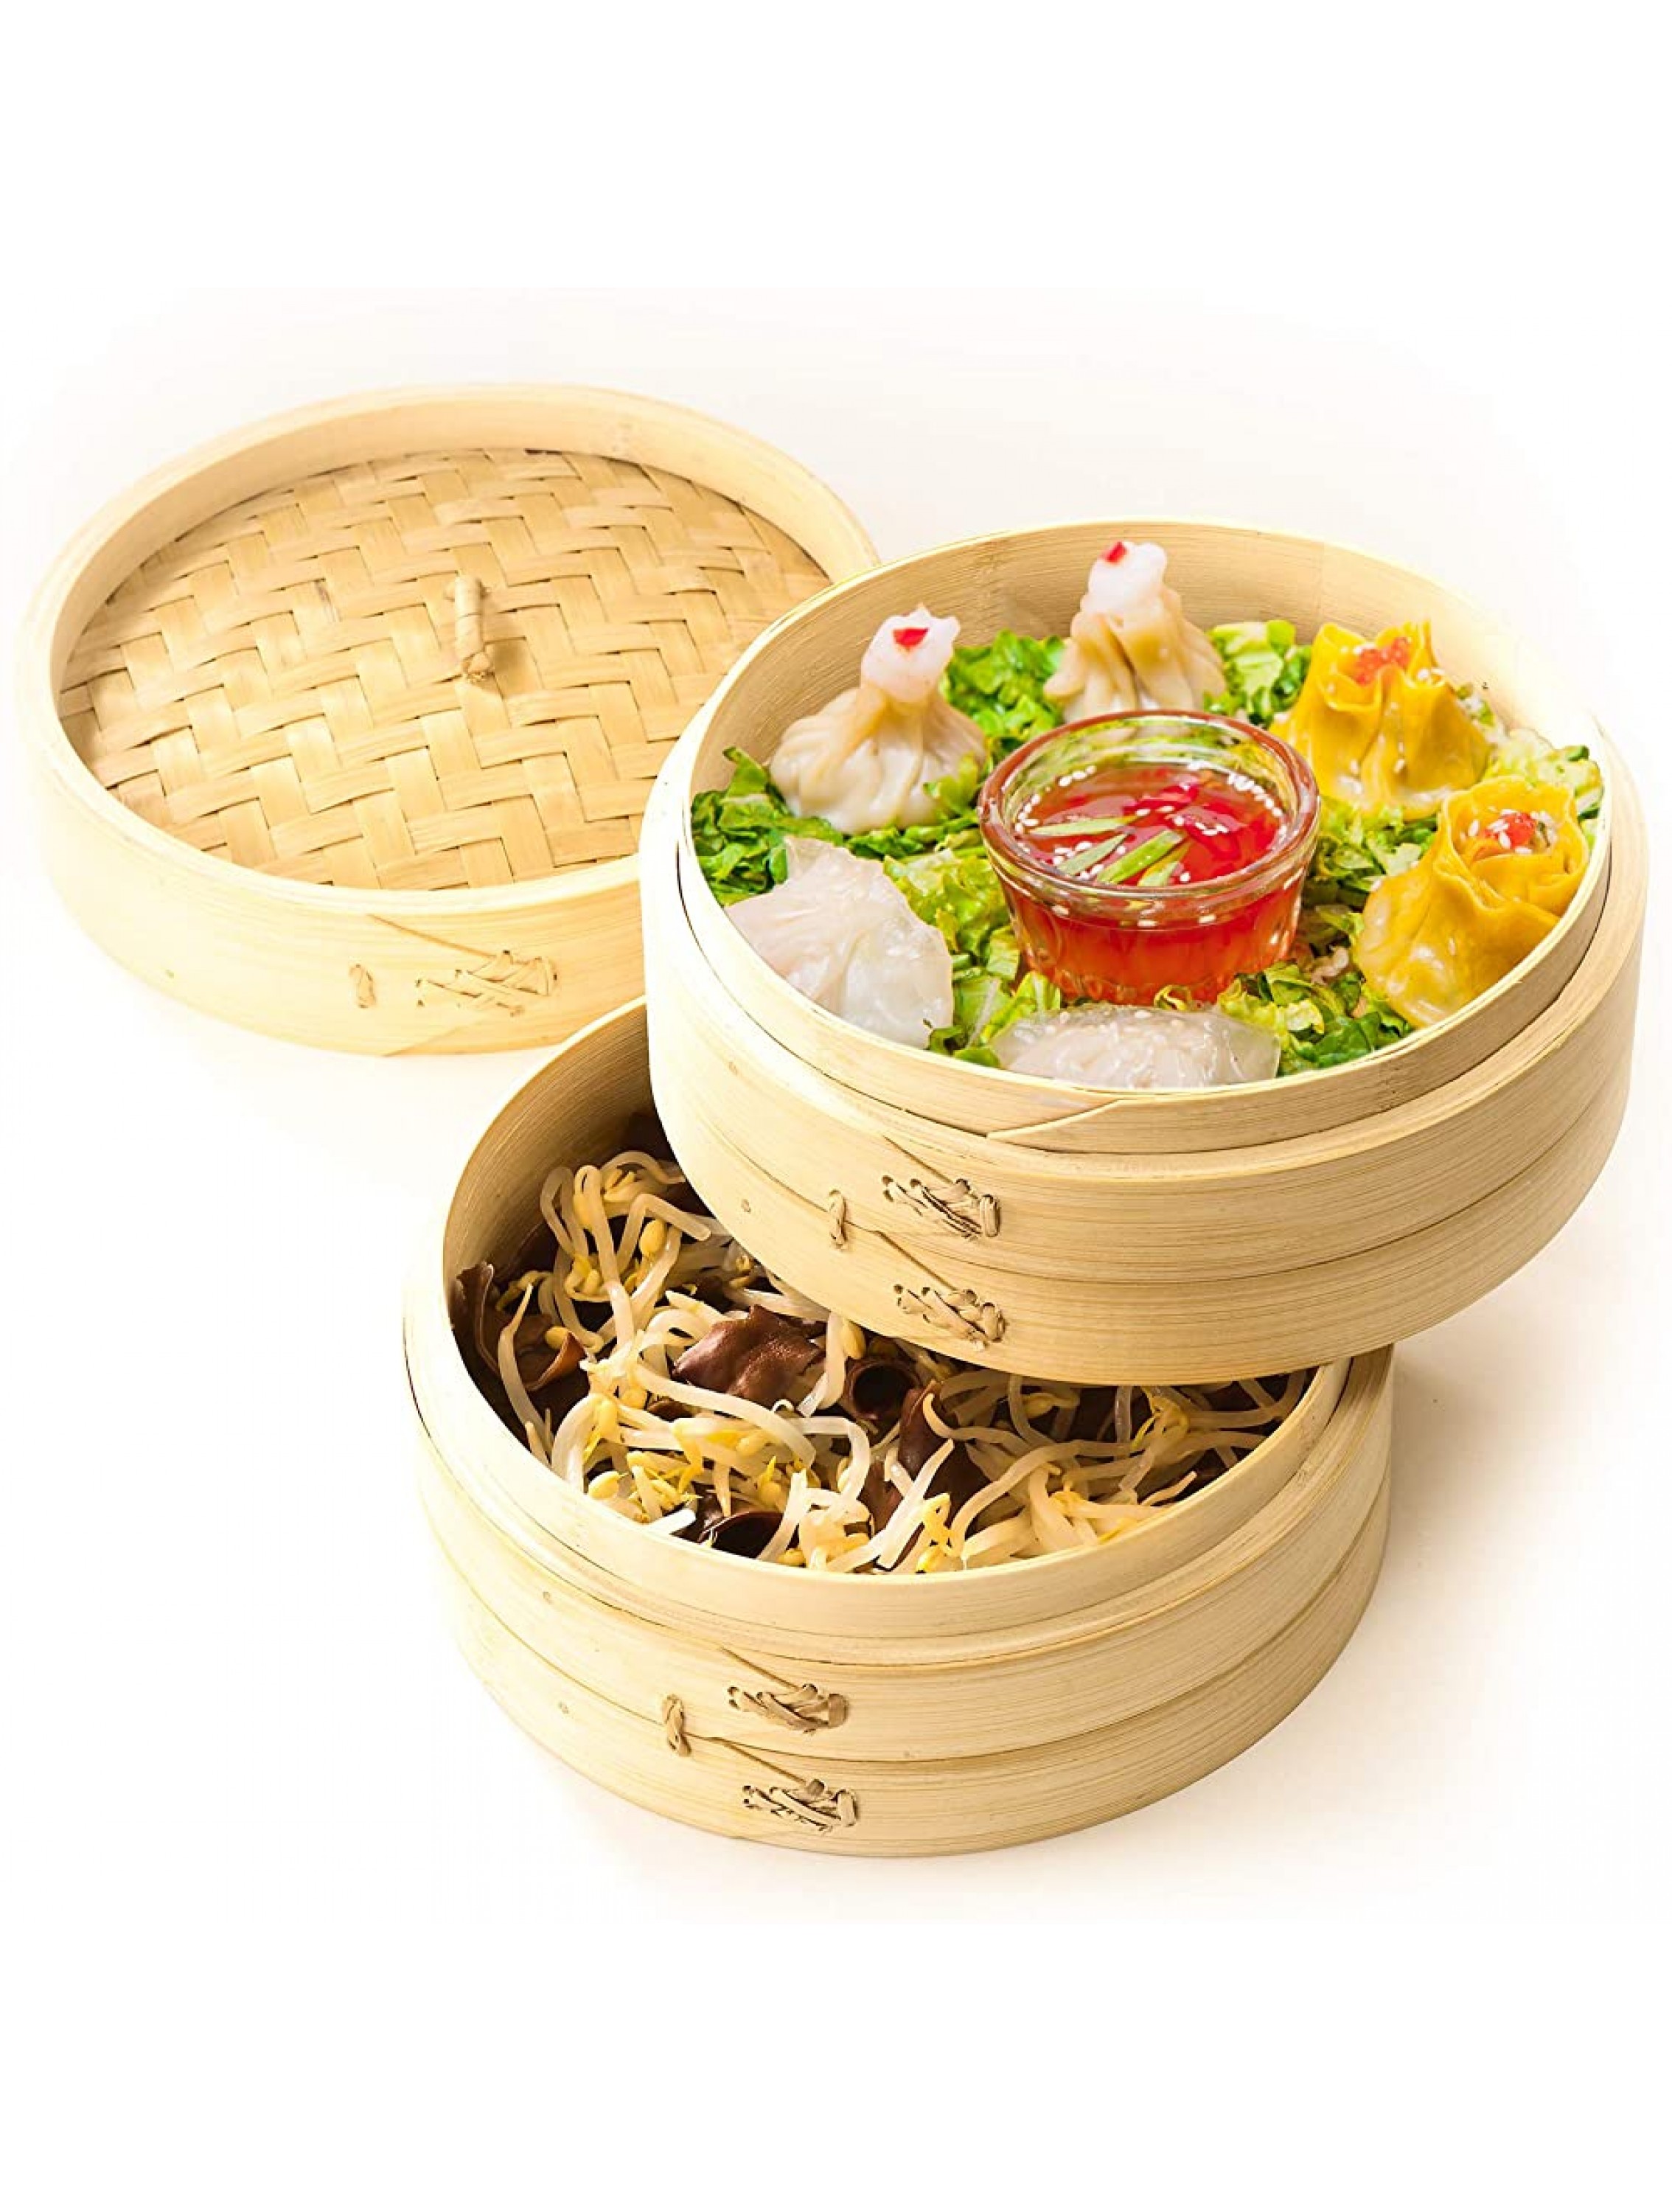 Bamboo Steamer 10 inch Chinese Steaming Basket for Cooking Dumplings Meat Fish Vegetables Bao Bun and Rice Dim Sum Steamer Liners and Chopsticks - BWPOT65EO